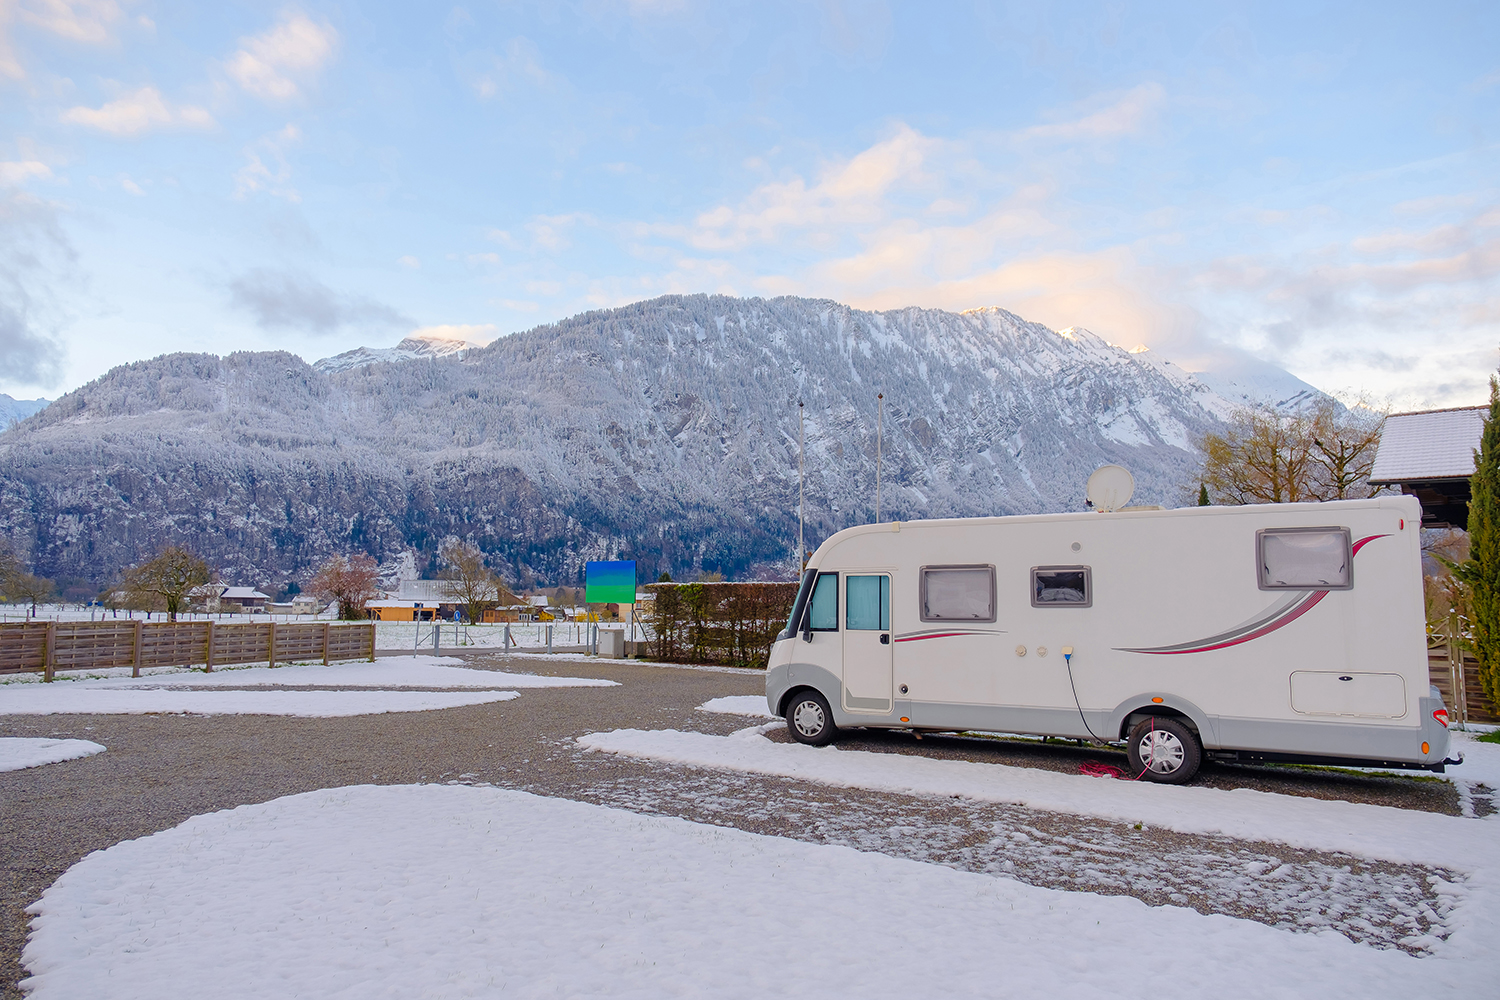 An RV in a snow-covered ccampground.